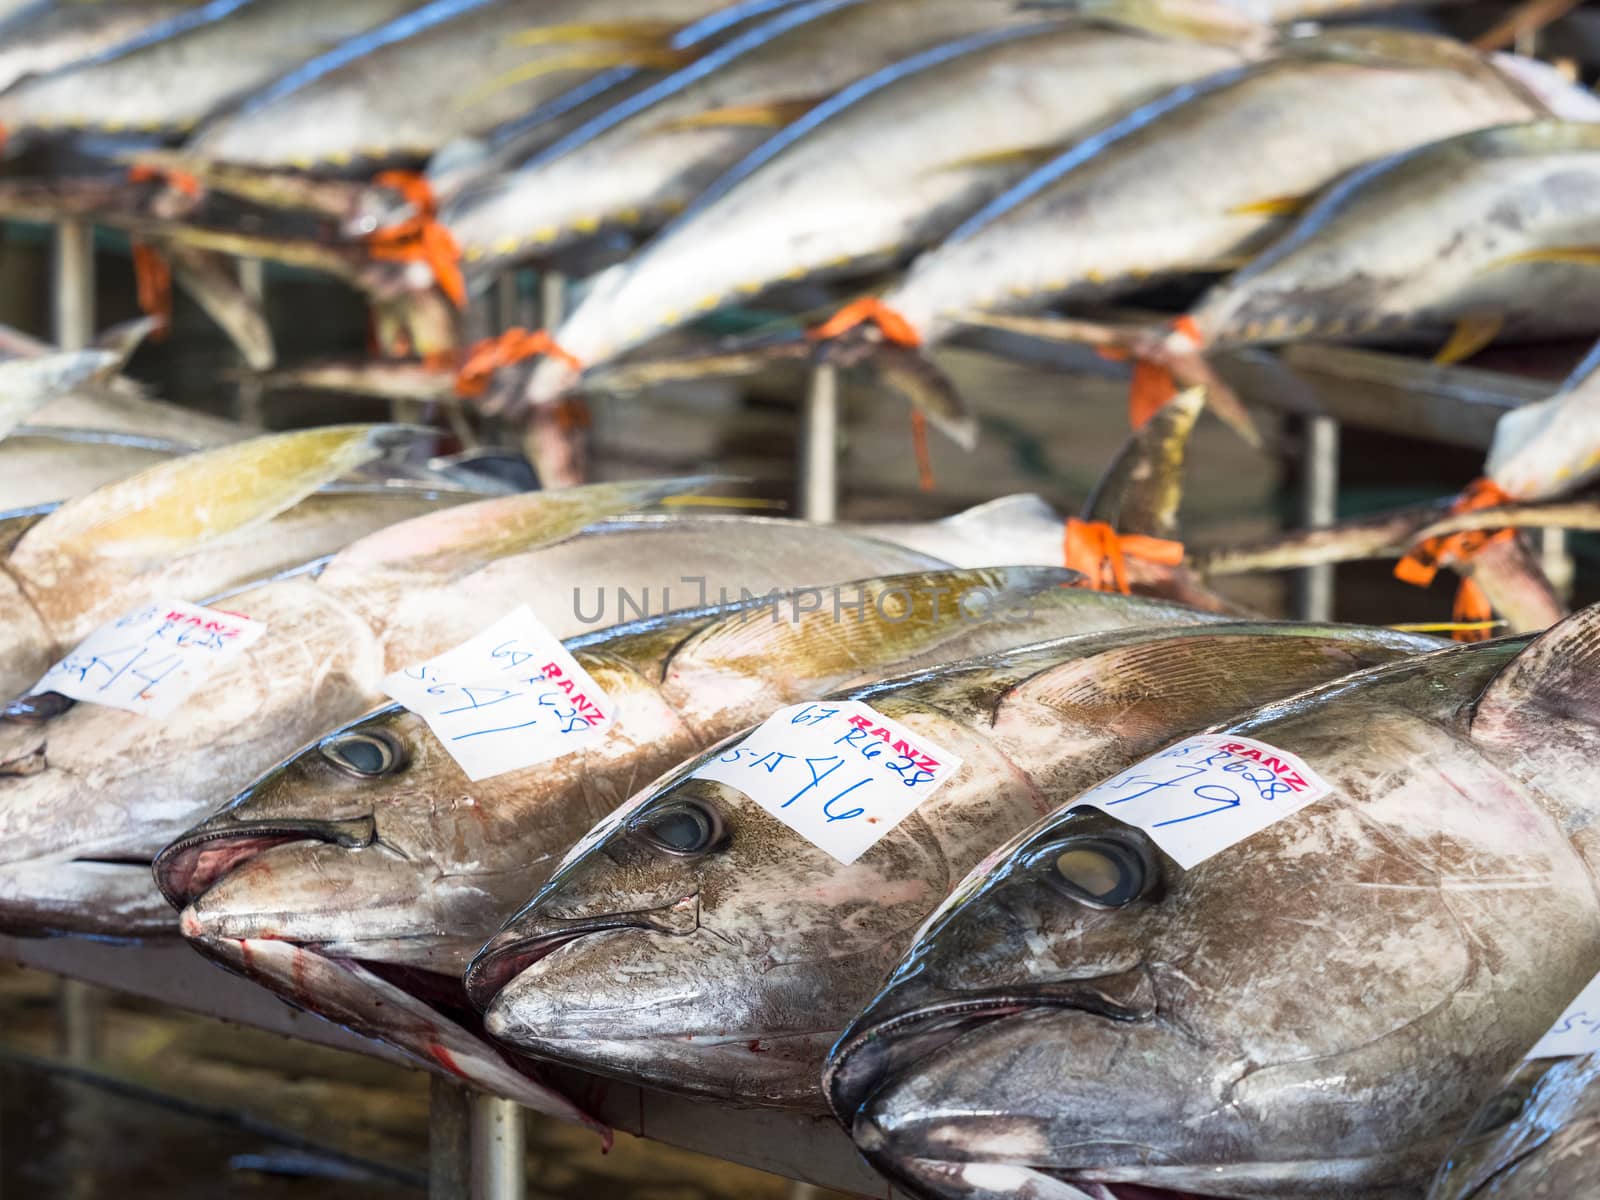 General Santos City - September 1, 2016: Yellowfin tuna lined up for sale at the Tuna Harbor in General Santos City, South Cotabato, The Philippines. General Santos is the Tuna Capital of The Philippines, and the tuna industry is an important contributor the the city’s economy with export worldwide.